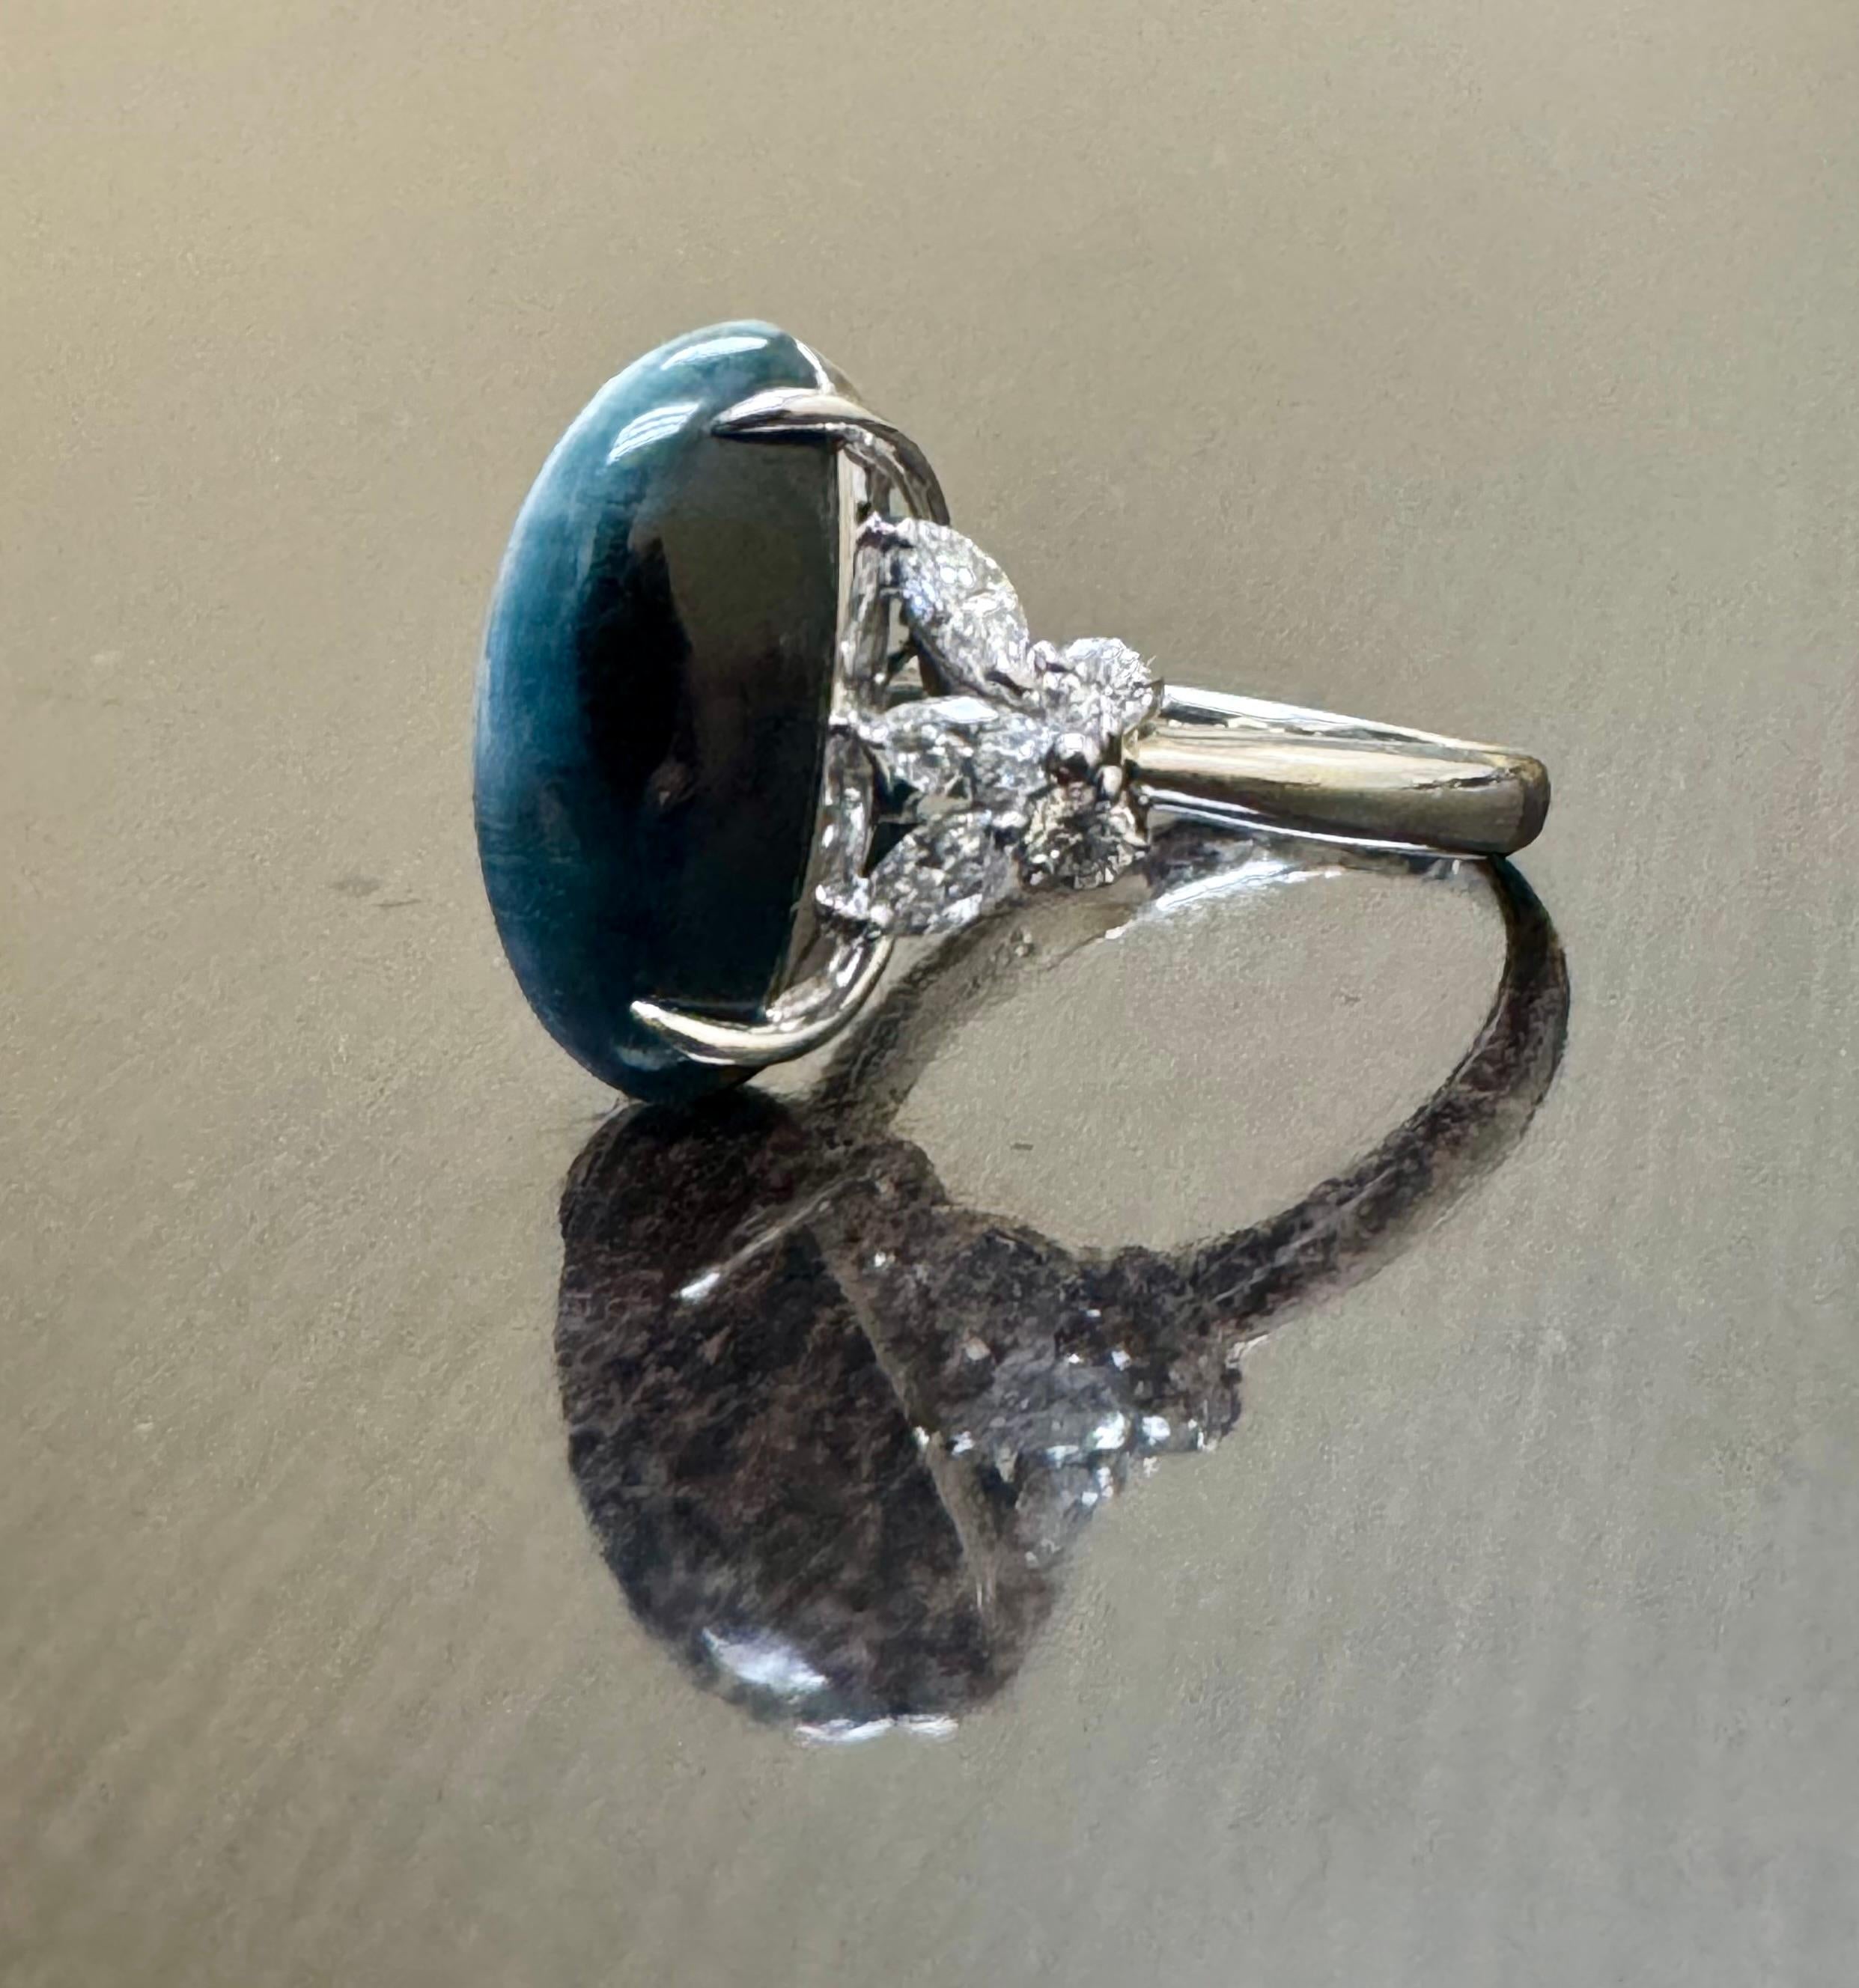 Handmade Platinum Marquise Diamond 7.13 Carat Catseye Tourmaline Engagement Ring In New Condition For Sale In Los Angeles, CA